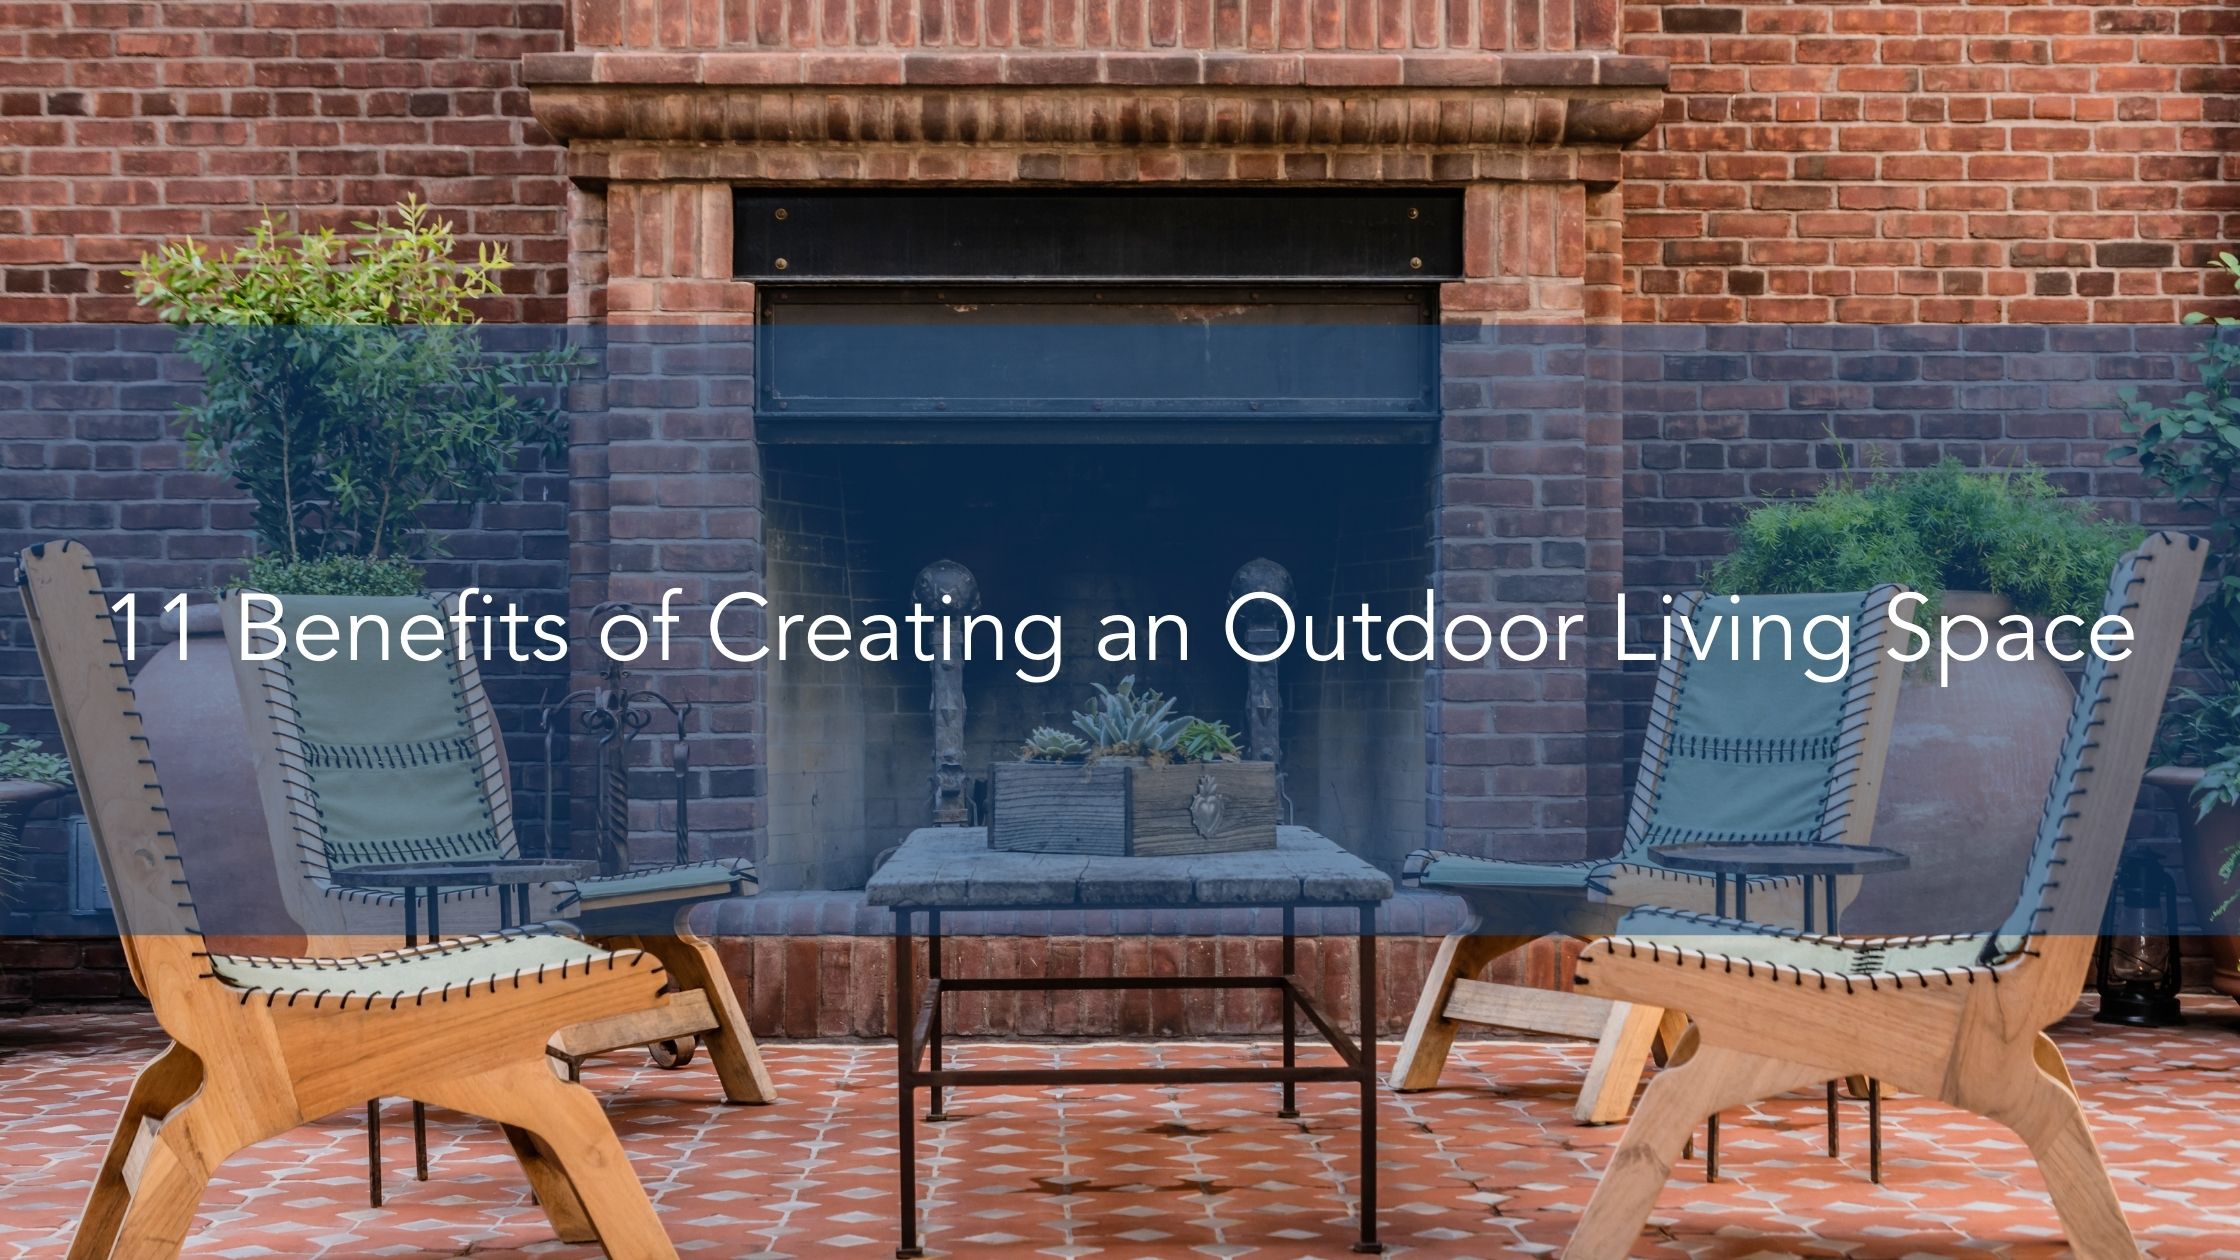 https://www.handymanconnection.net/wp-content/uploads/2022/06/11-Benefits-of-Creating-an-Outdoor-Living-Space.jpg